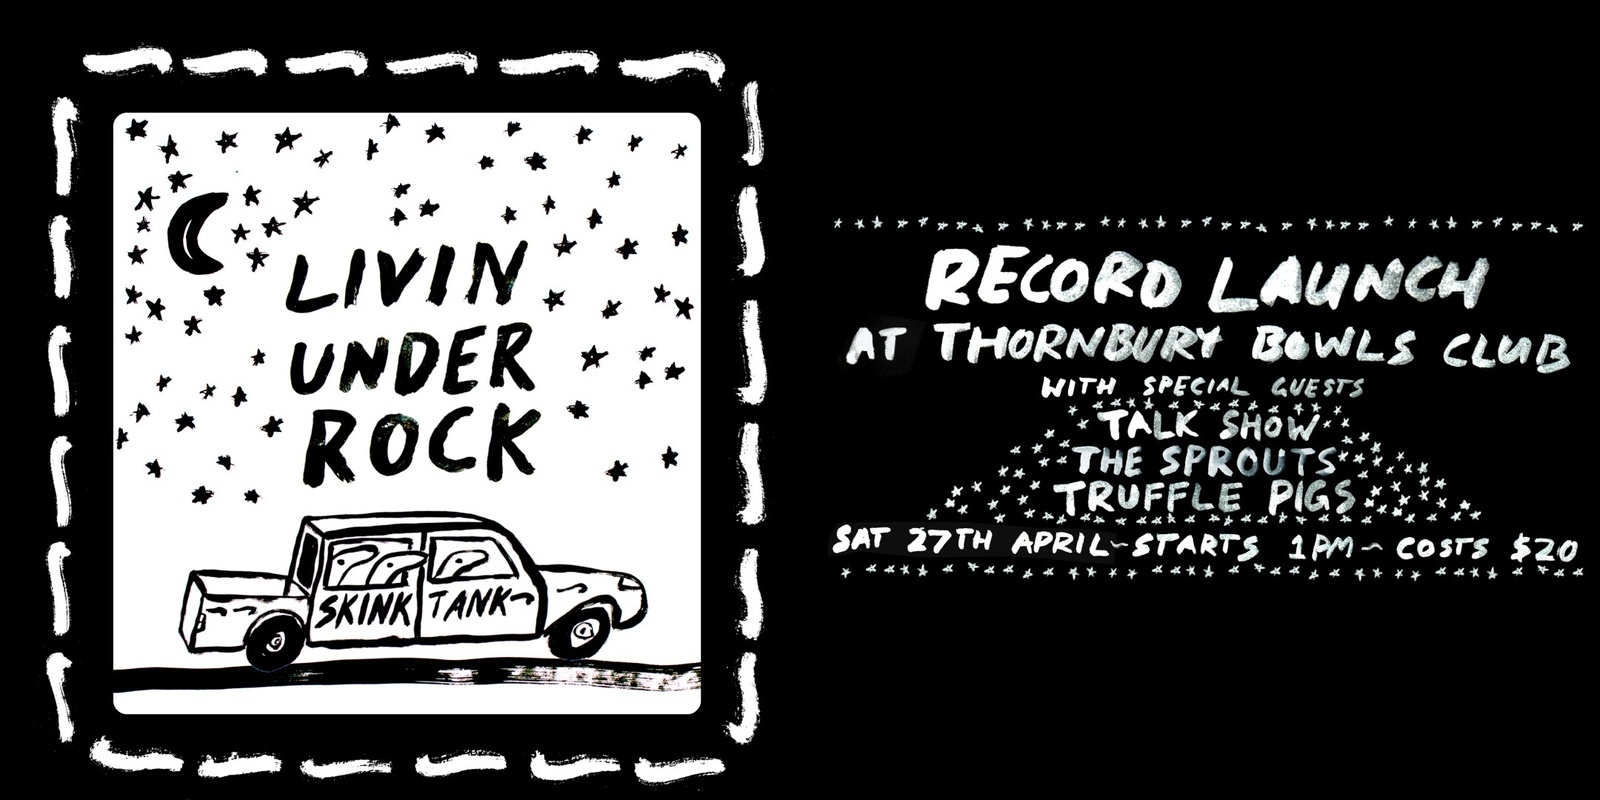 Banner image for Skink Tank 'Livin Under Rock' record launch with Truffle Pigs and Talk Show